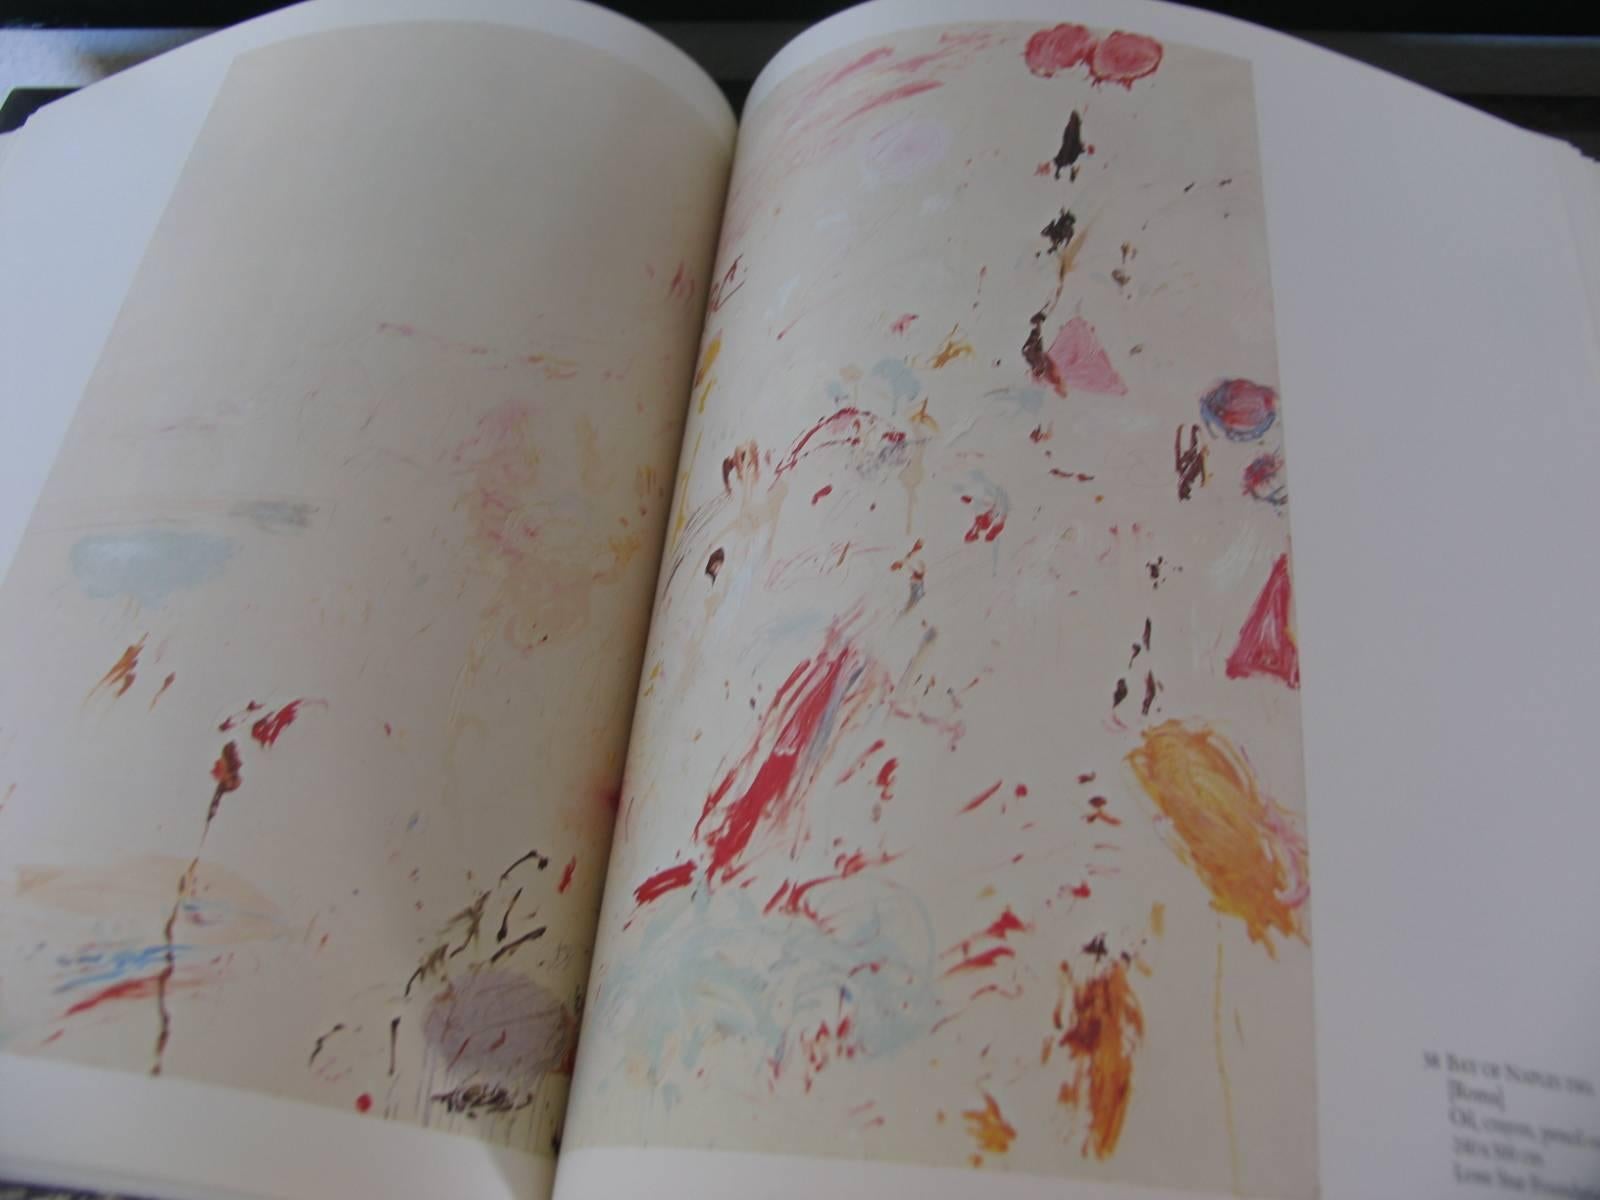 German Cy Twombly Bilder Paintings 1952-1976, Volume 1, First Edition, 1978 For Sale